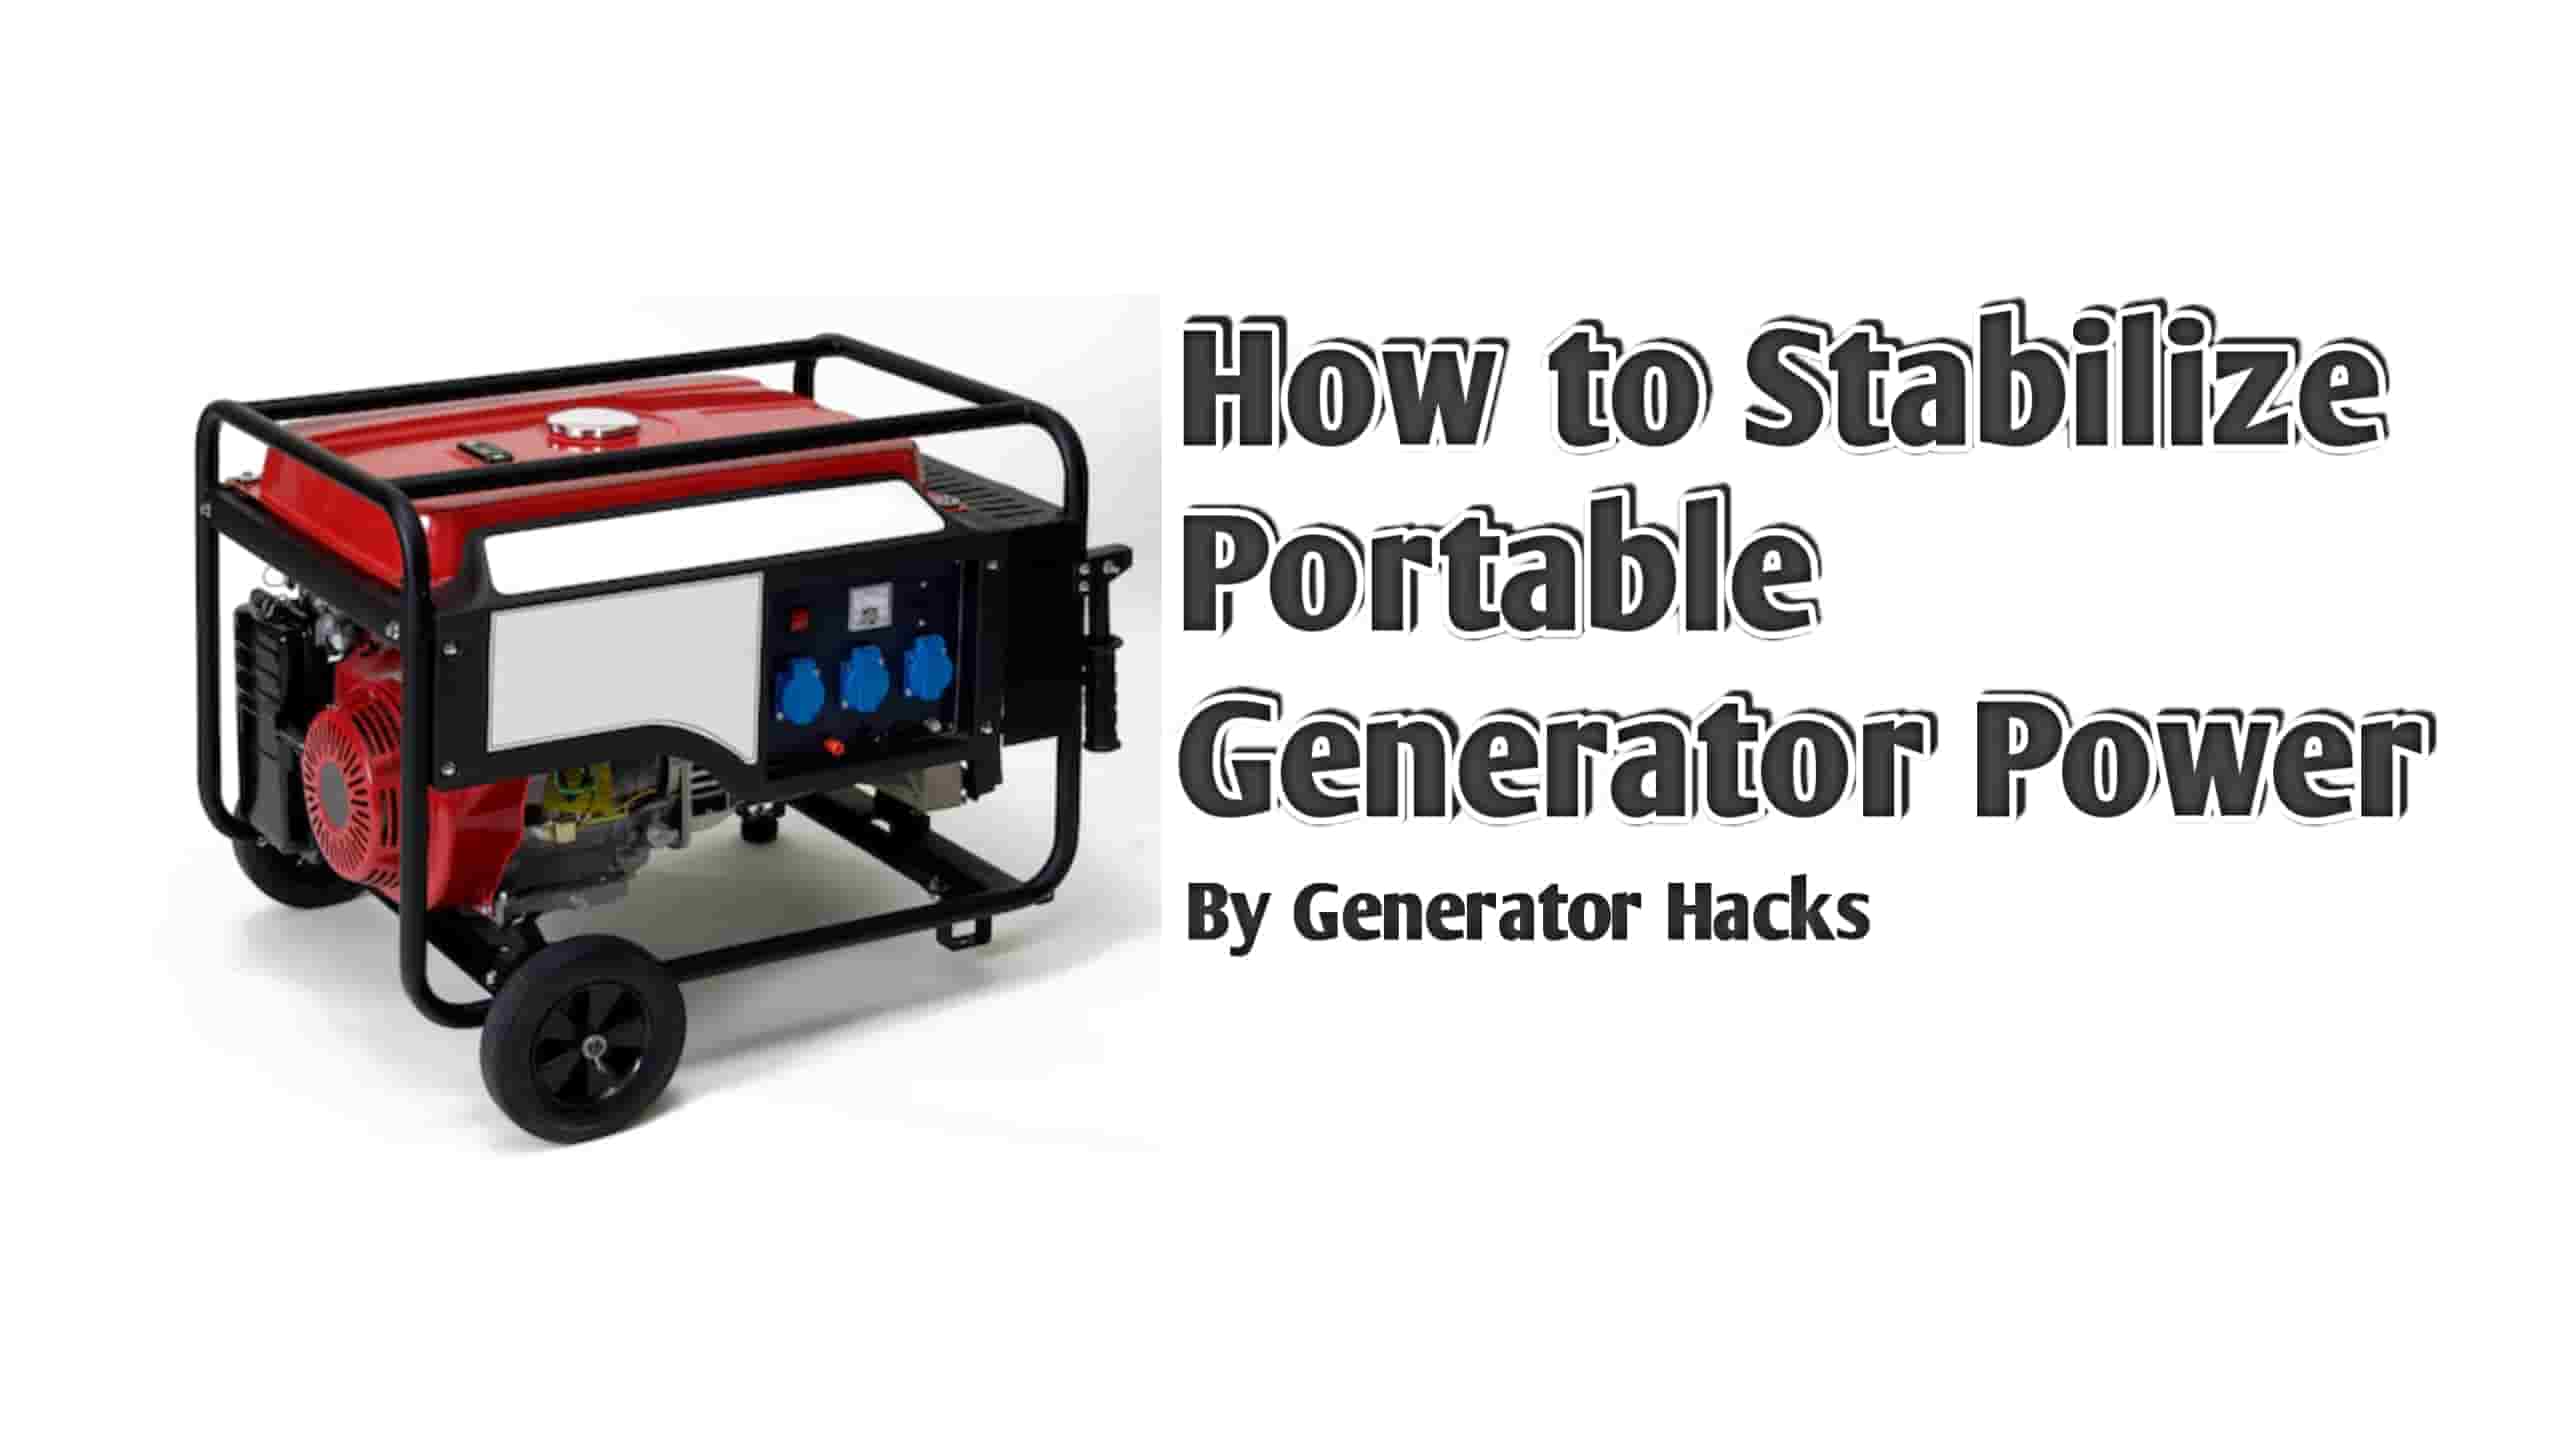 How to Stabilize Portable Generator Power,